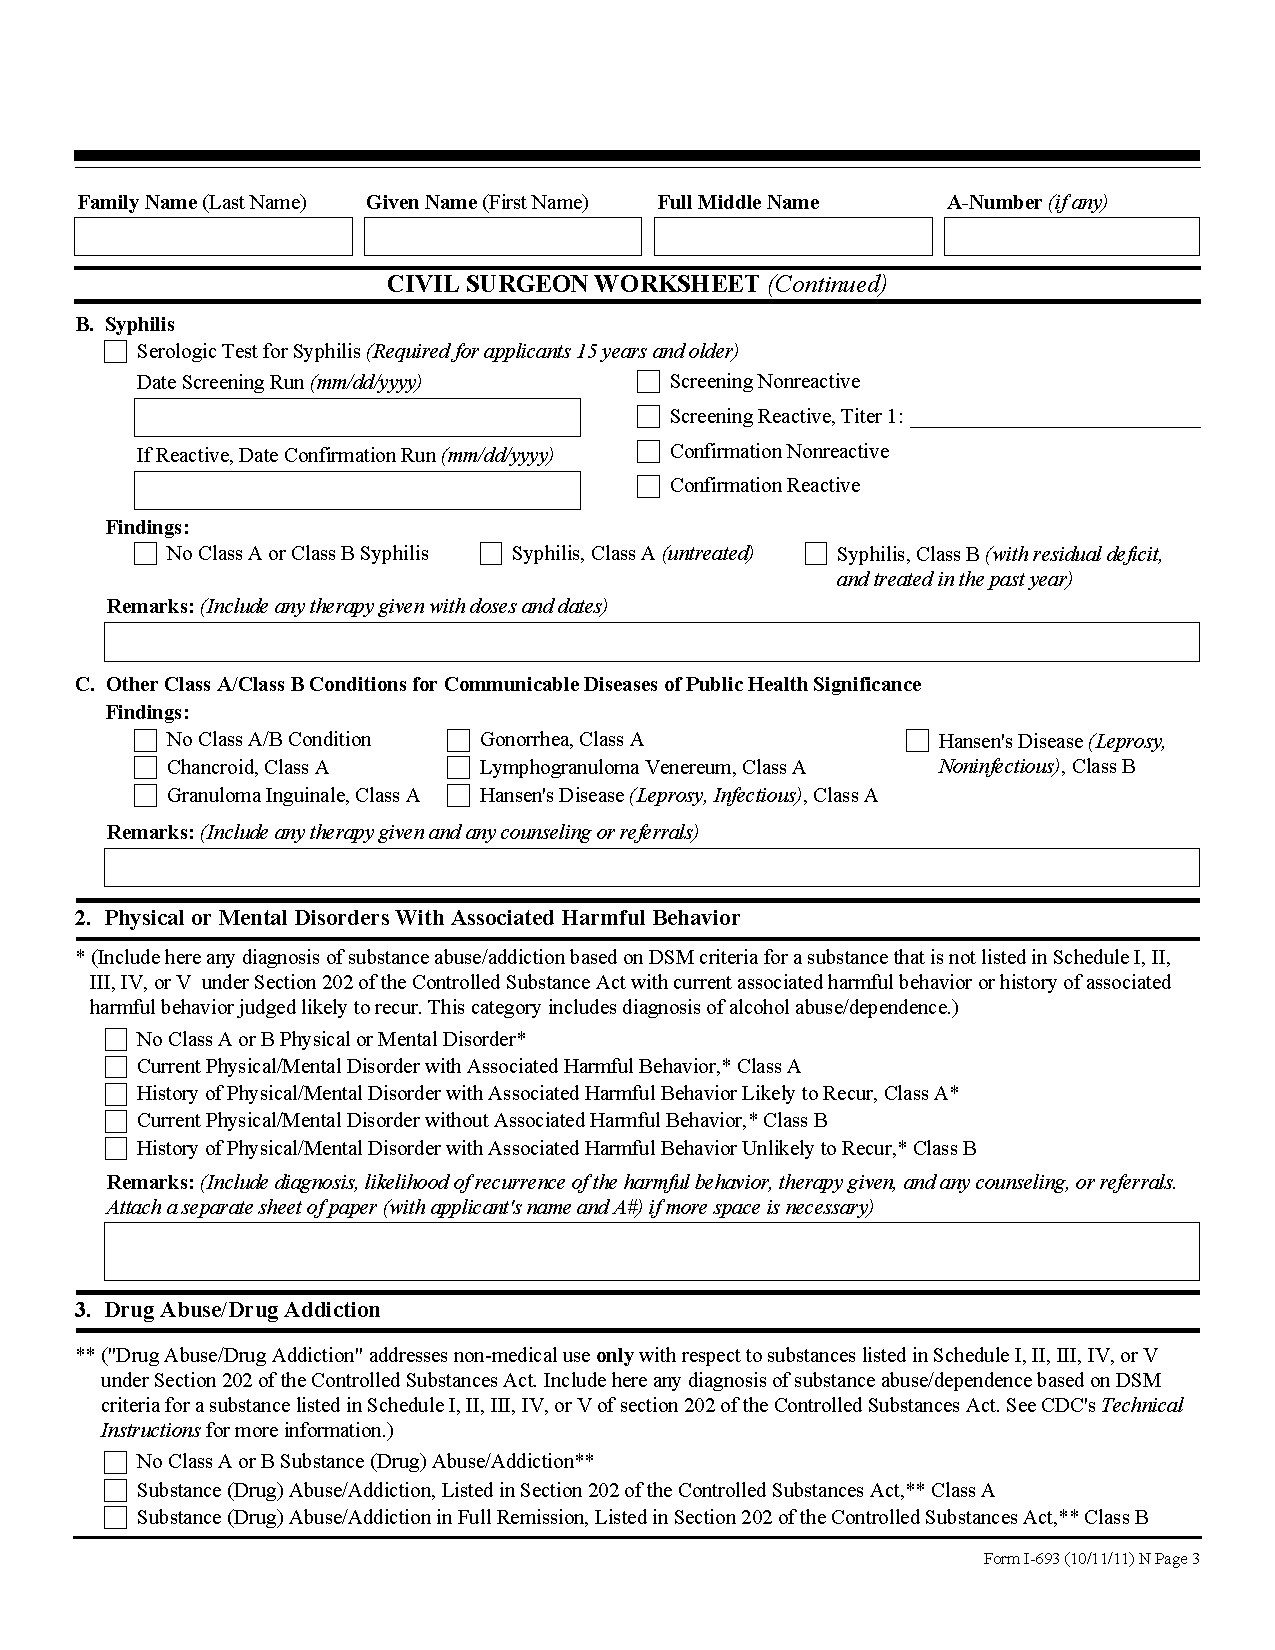 Form I 693 Report of Medical Examination and Vaccination Record